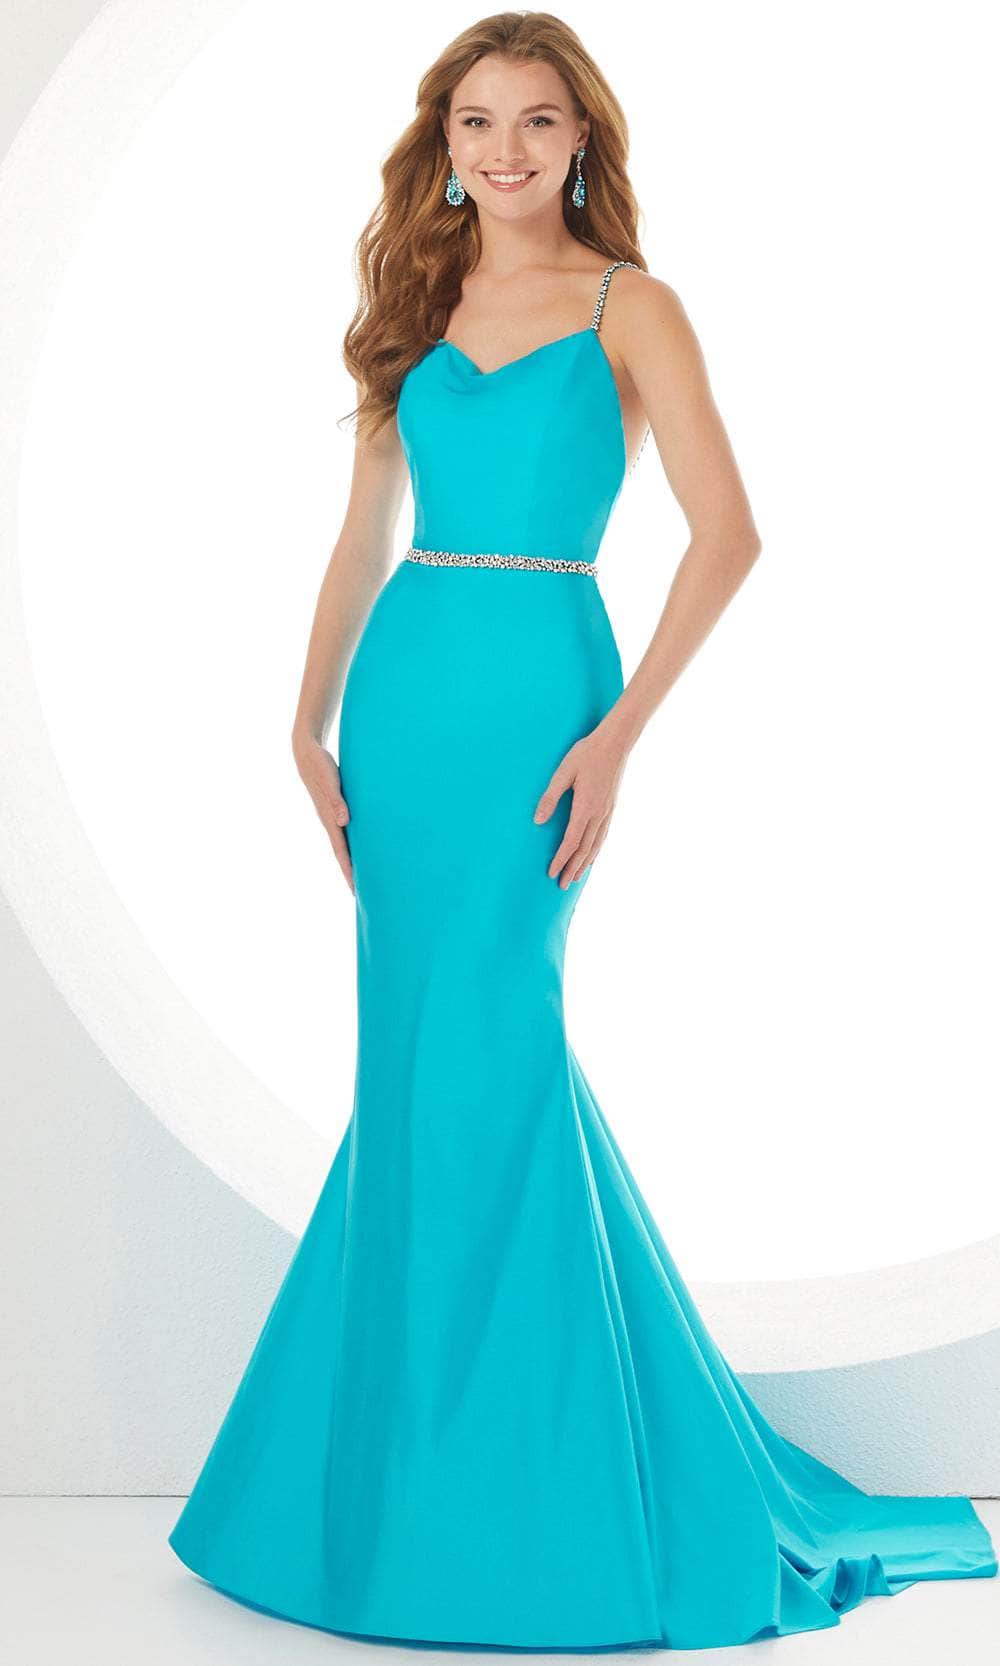 Panoply - 14098 Strap-Ornate Plunging Back Gown
